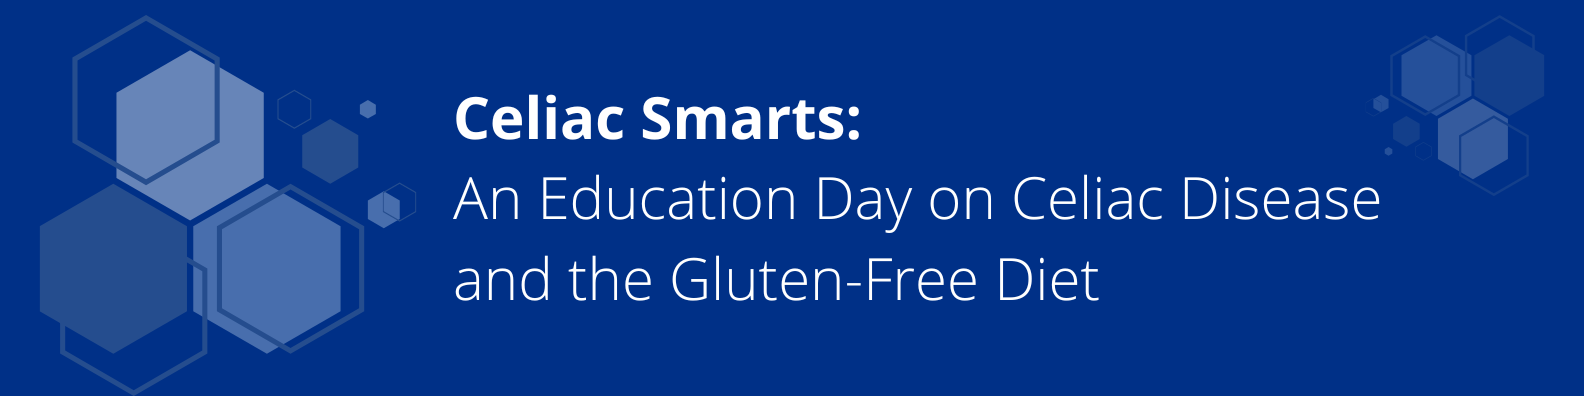 Celiac Smarts: An Education Day on Celiac Disease and the Gluten-Free Diet Banner